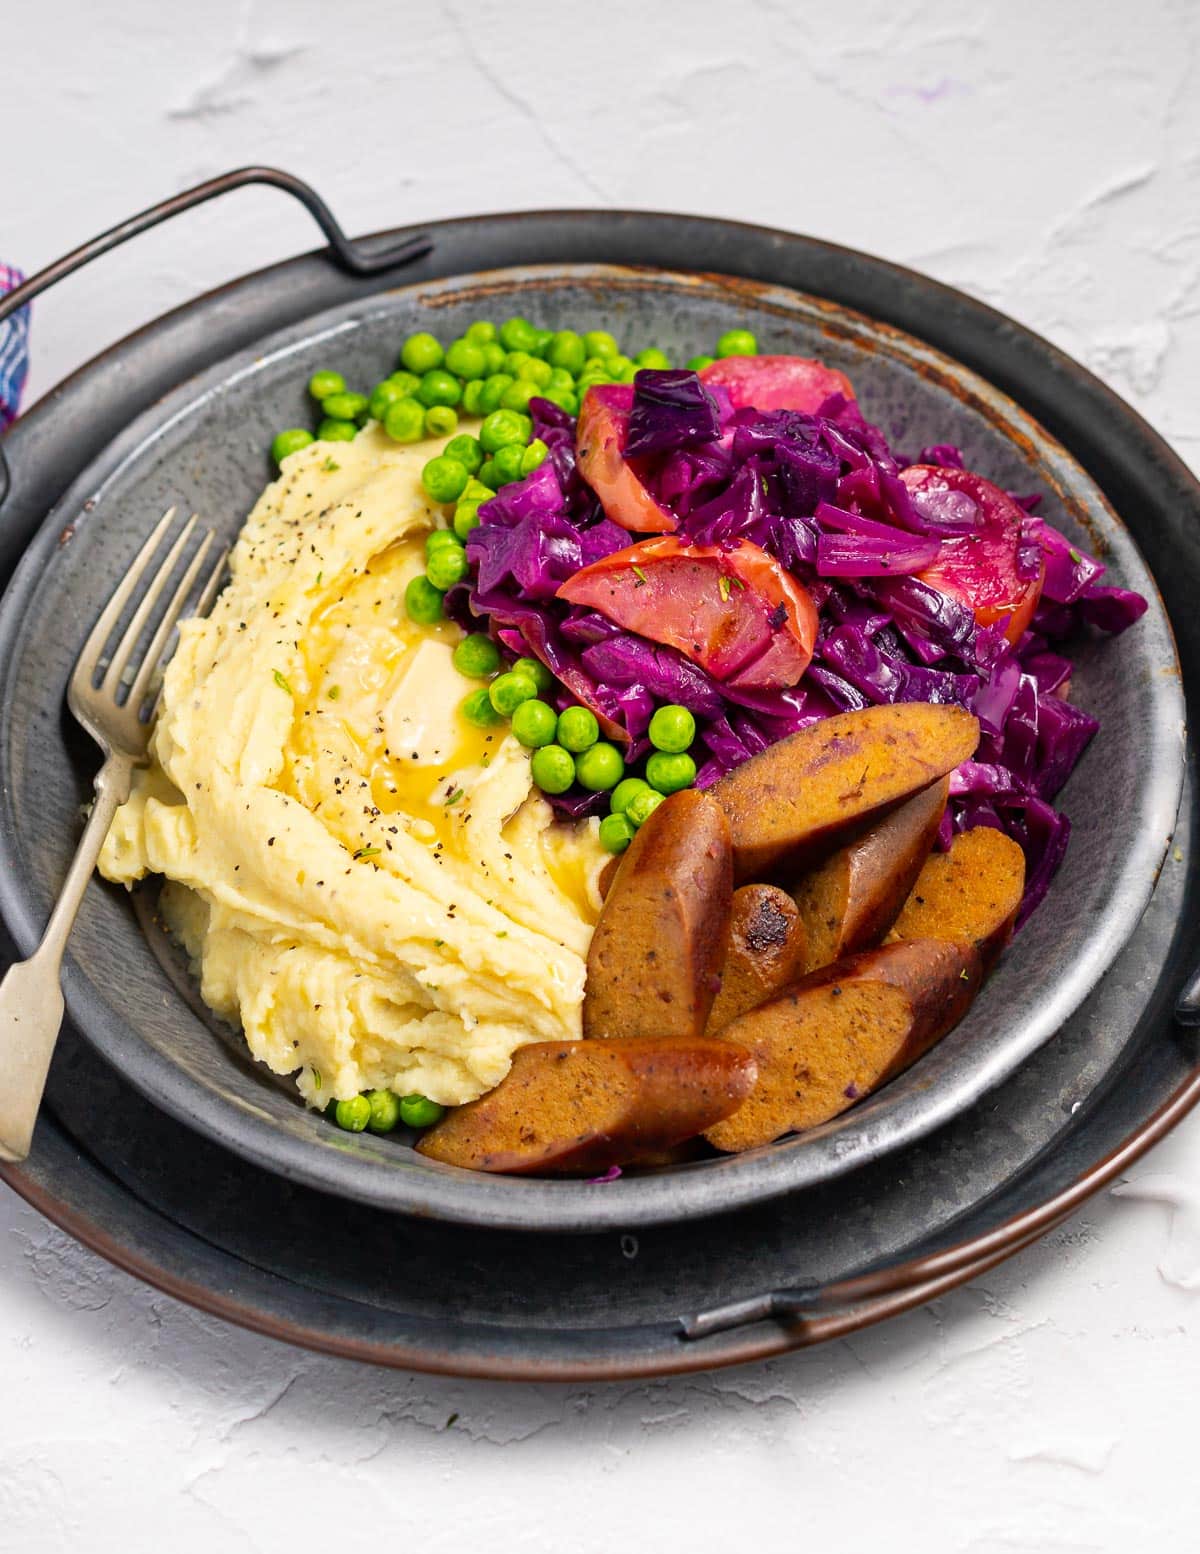 red cabbage, mashed potato and sausages on a metal plate